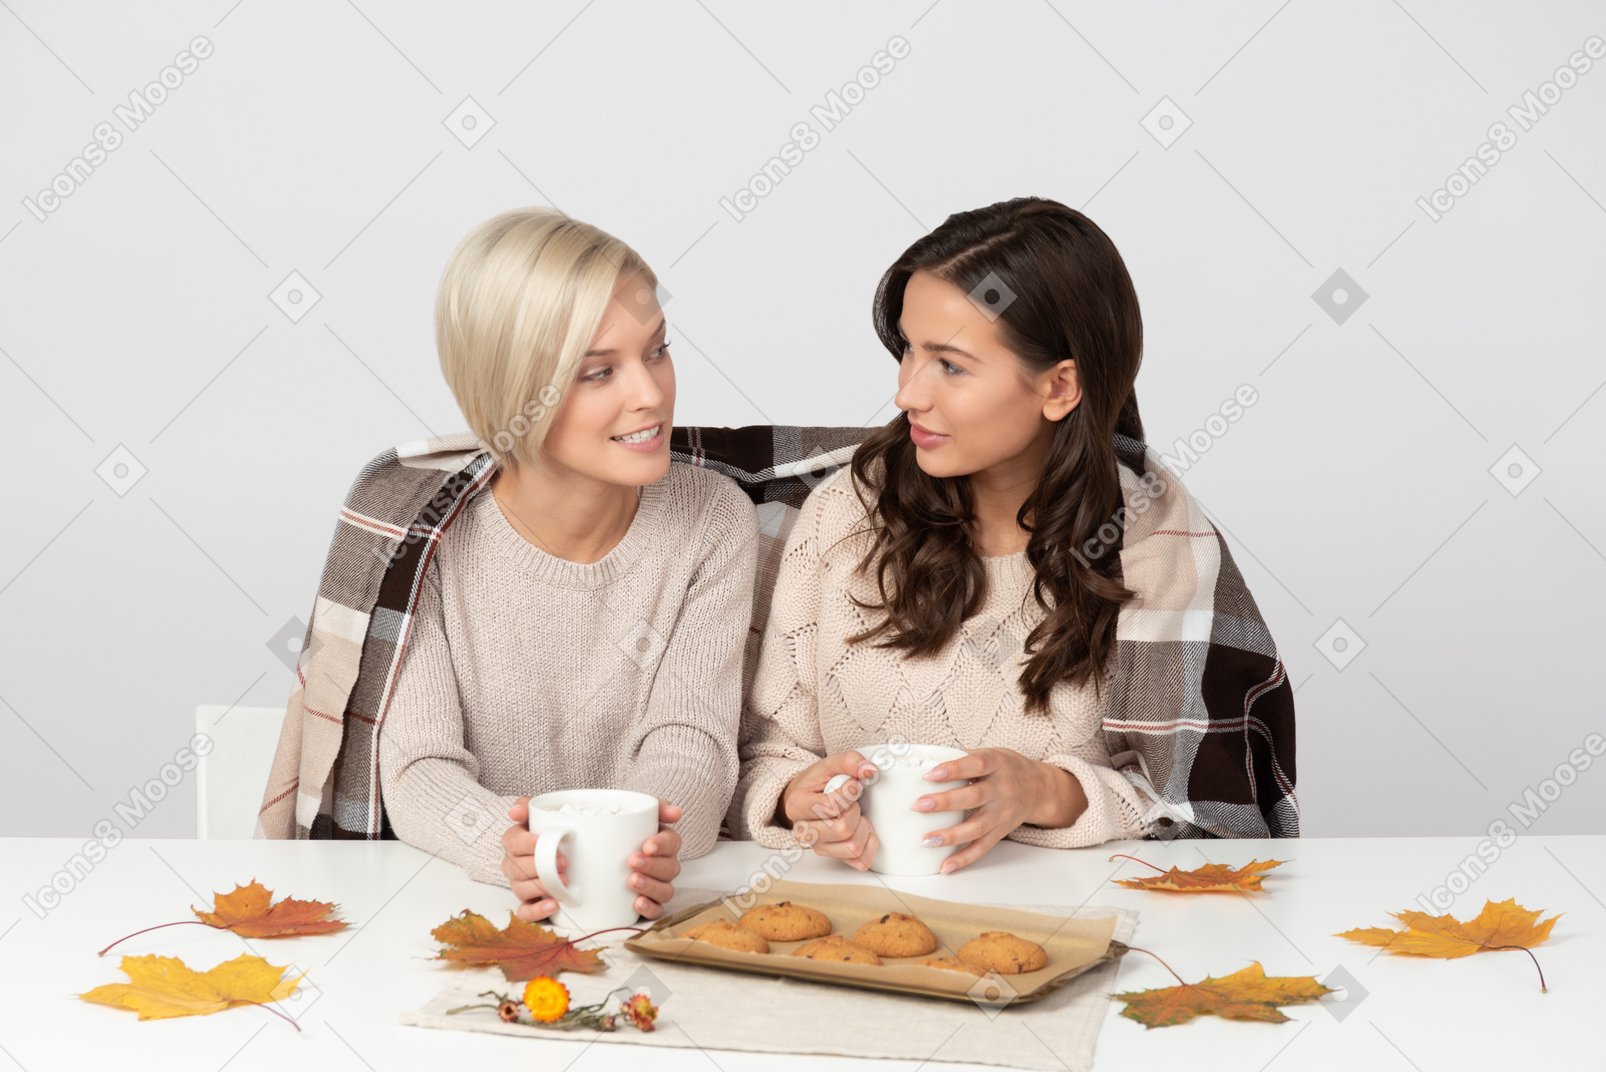 Young women drinking coffee and looking at each other